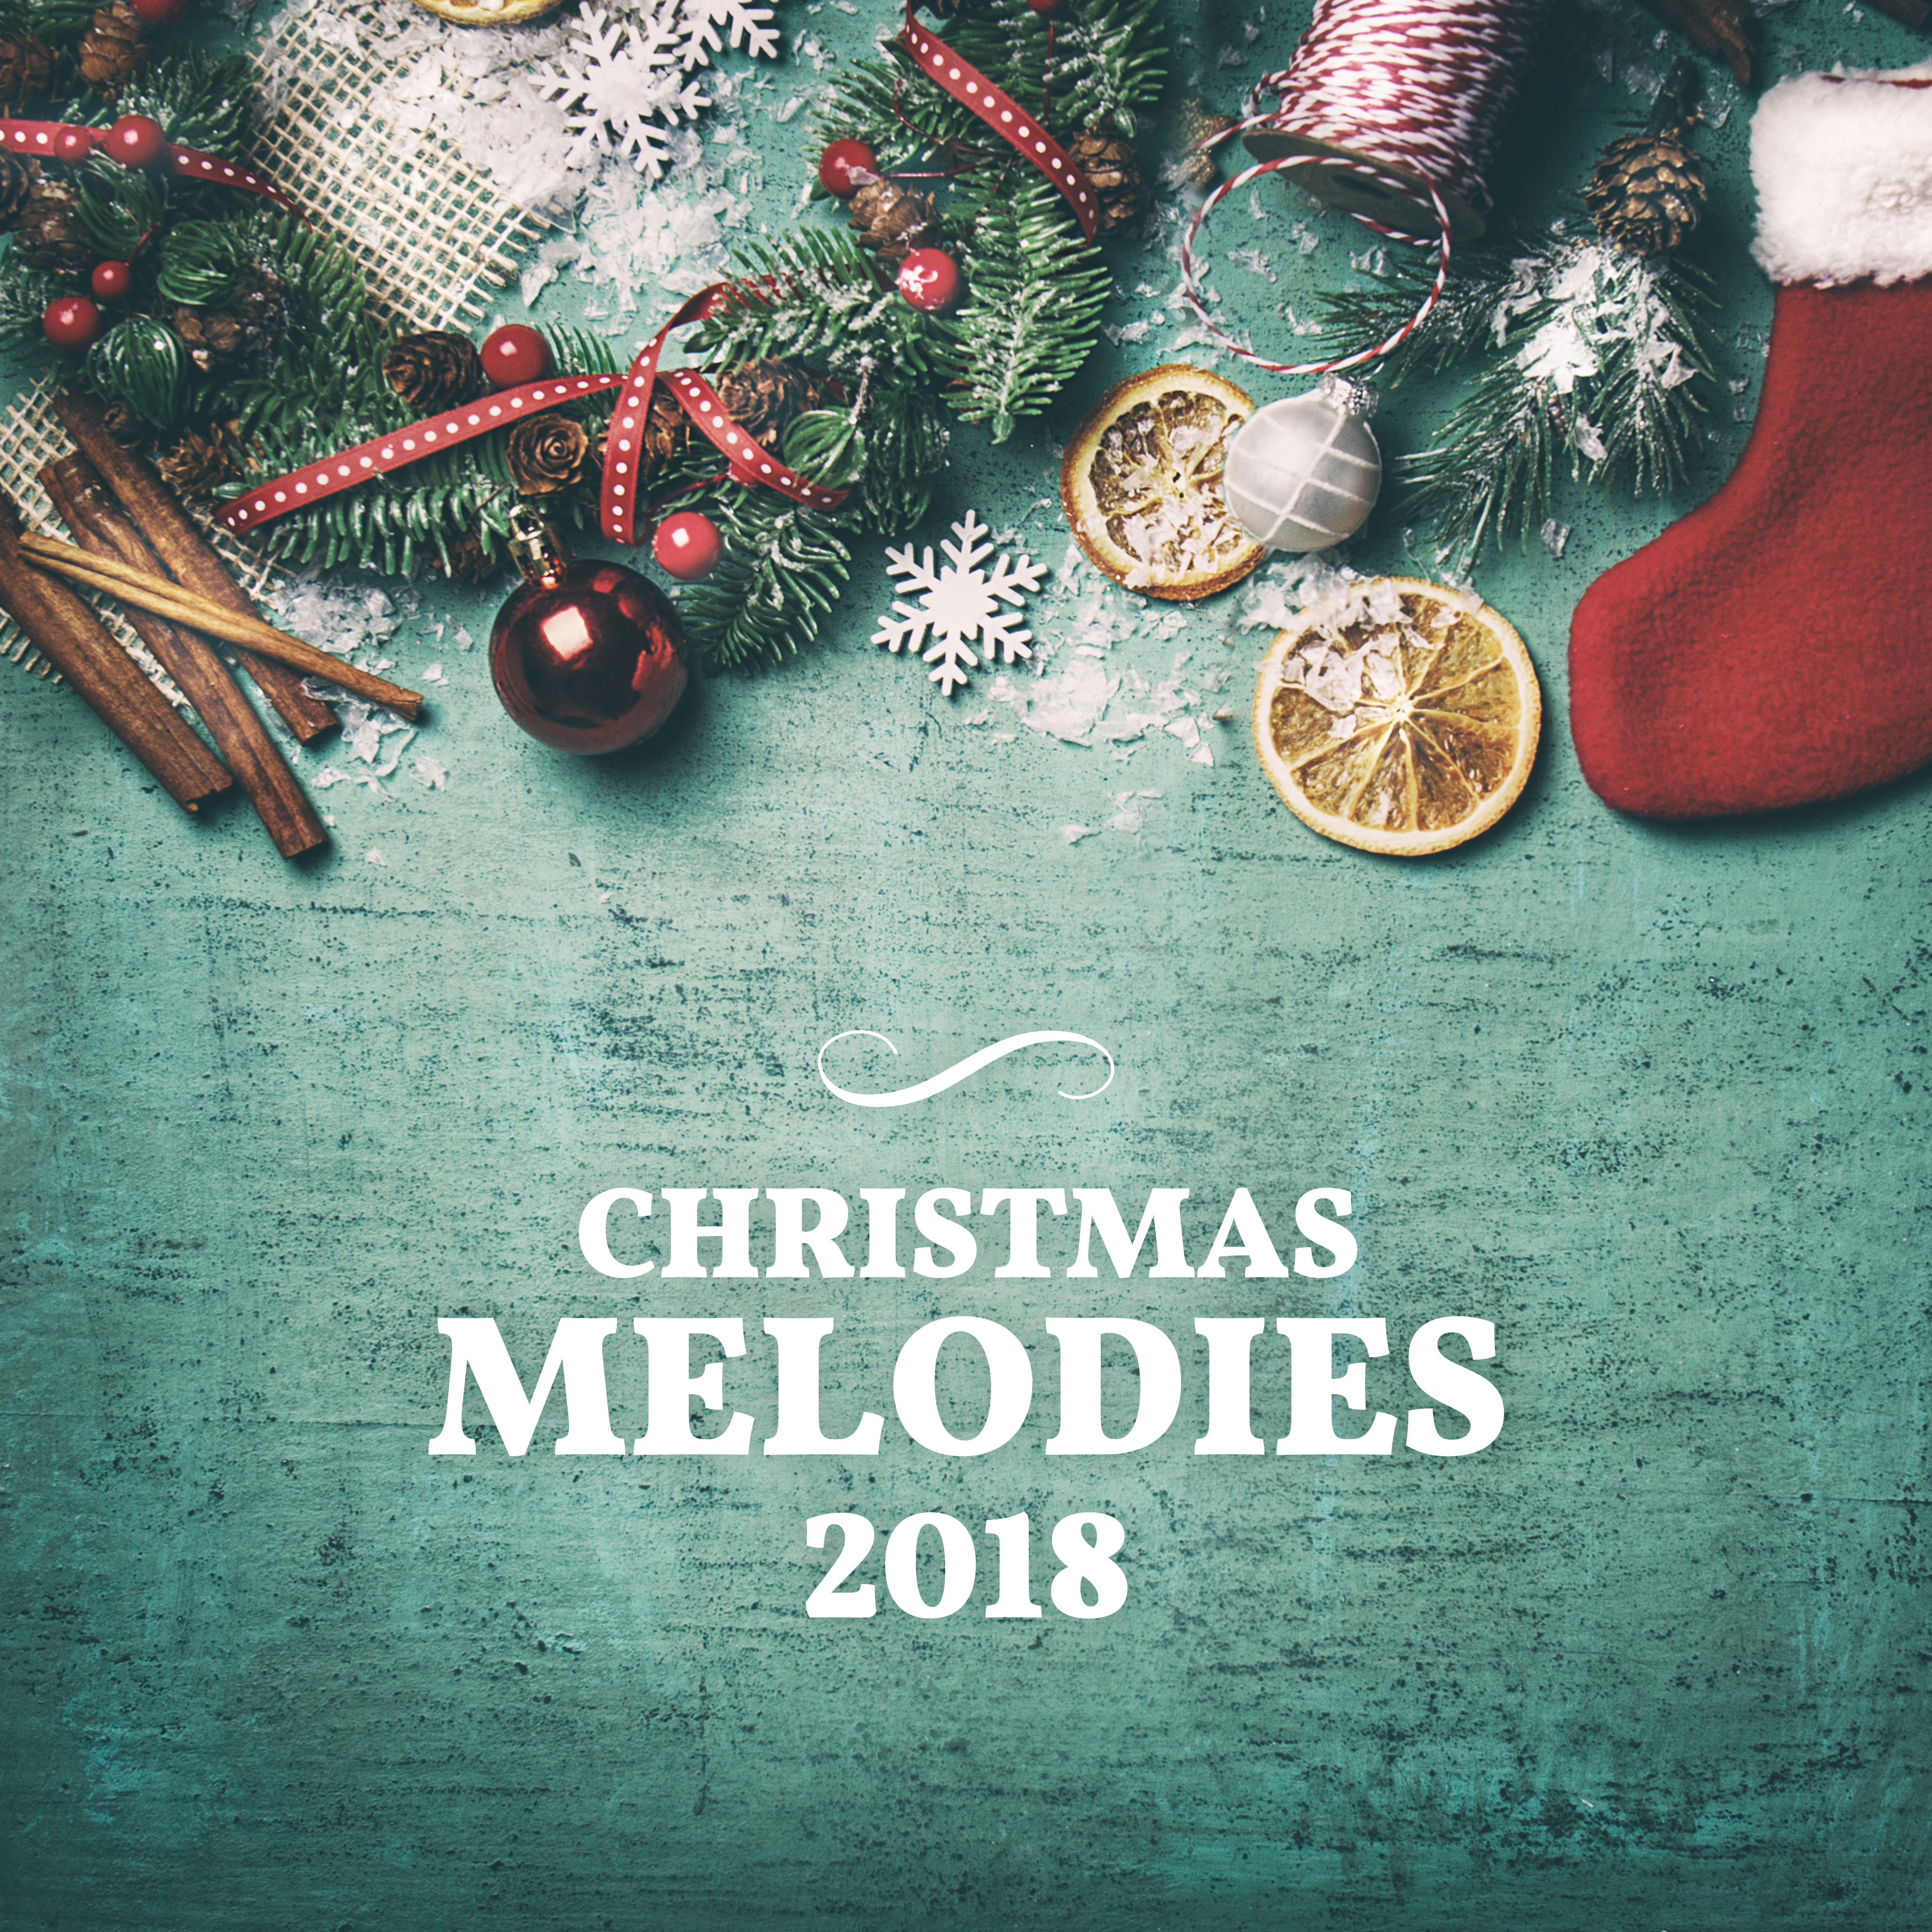 Christmas Melodies 2018